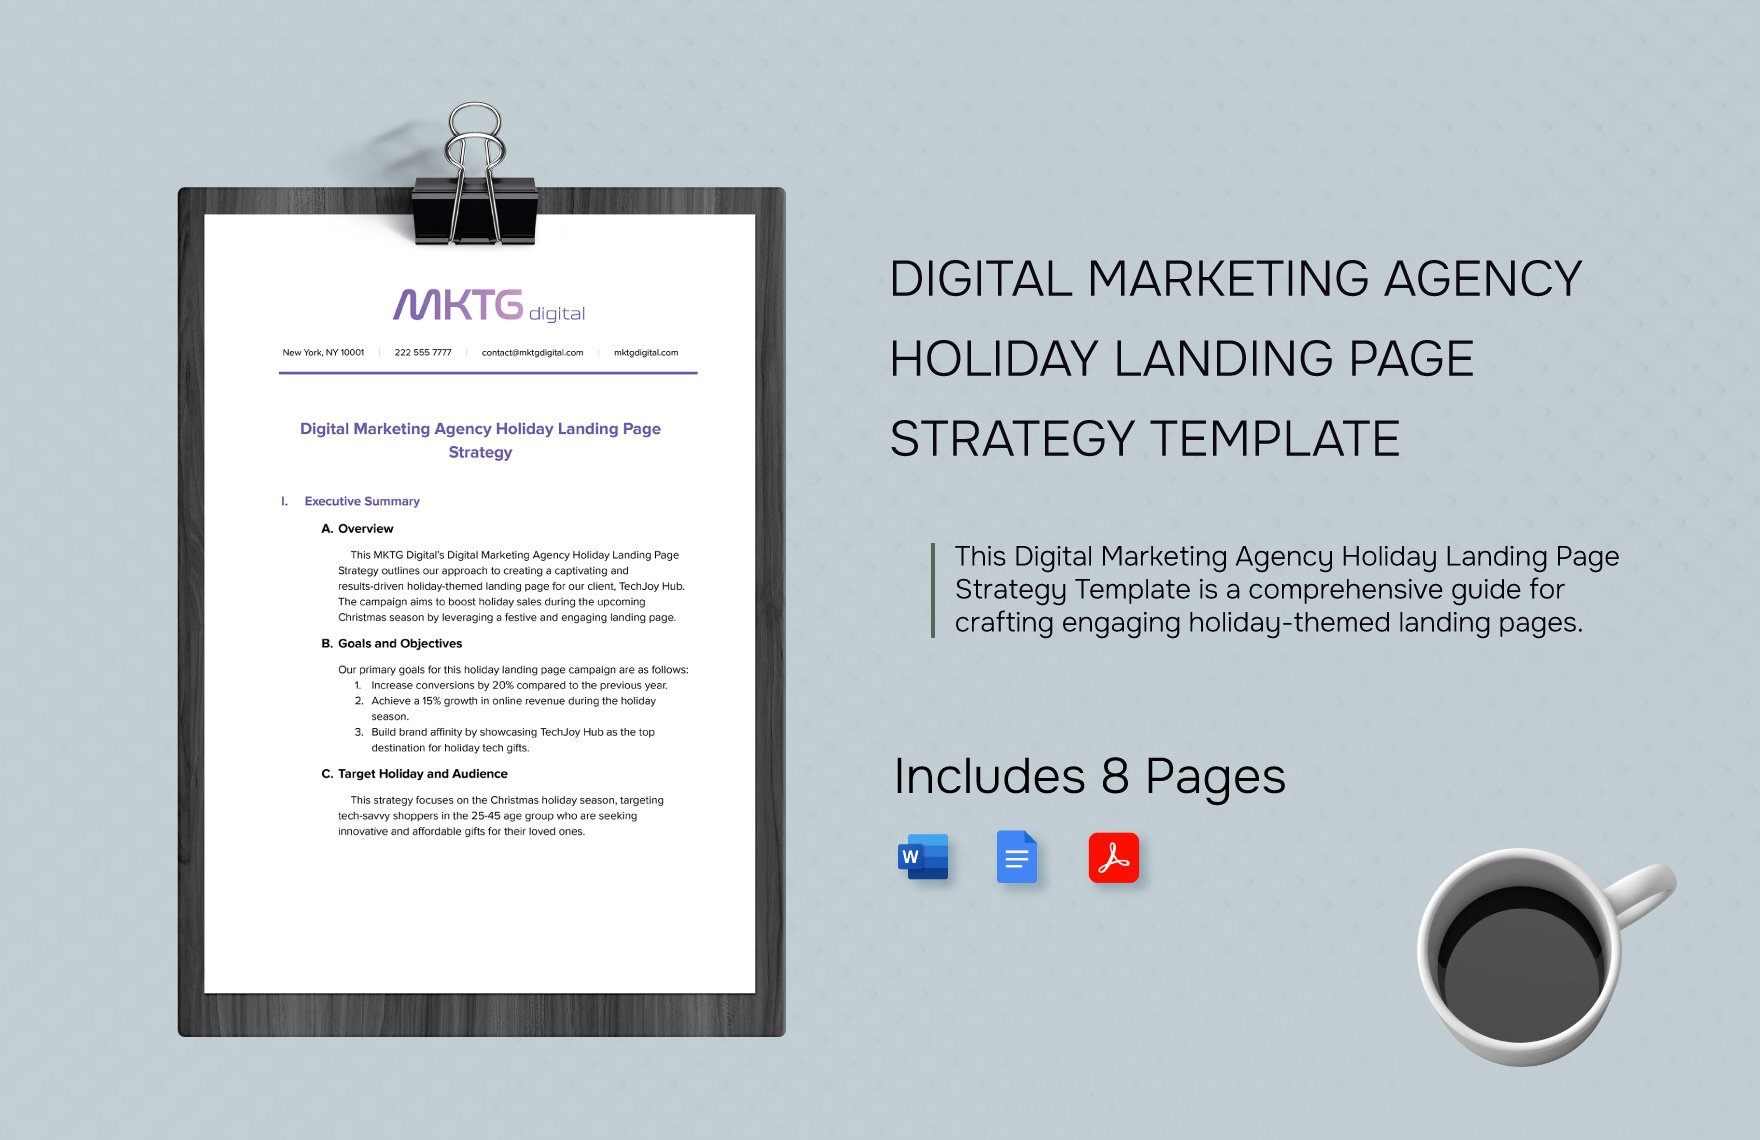 Digital Marketing Agency Holiday Landing Page Strategy Template in Word, Google Docs, PDF